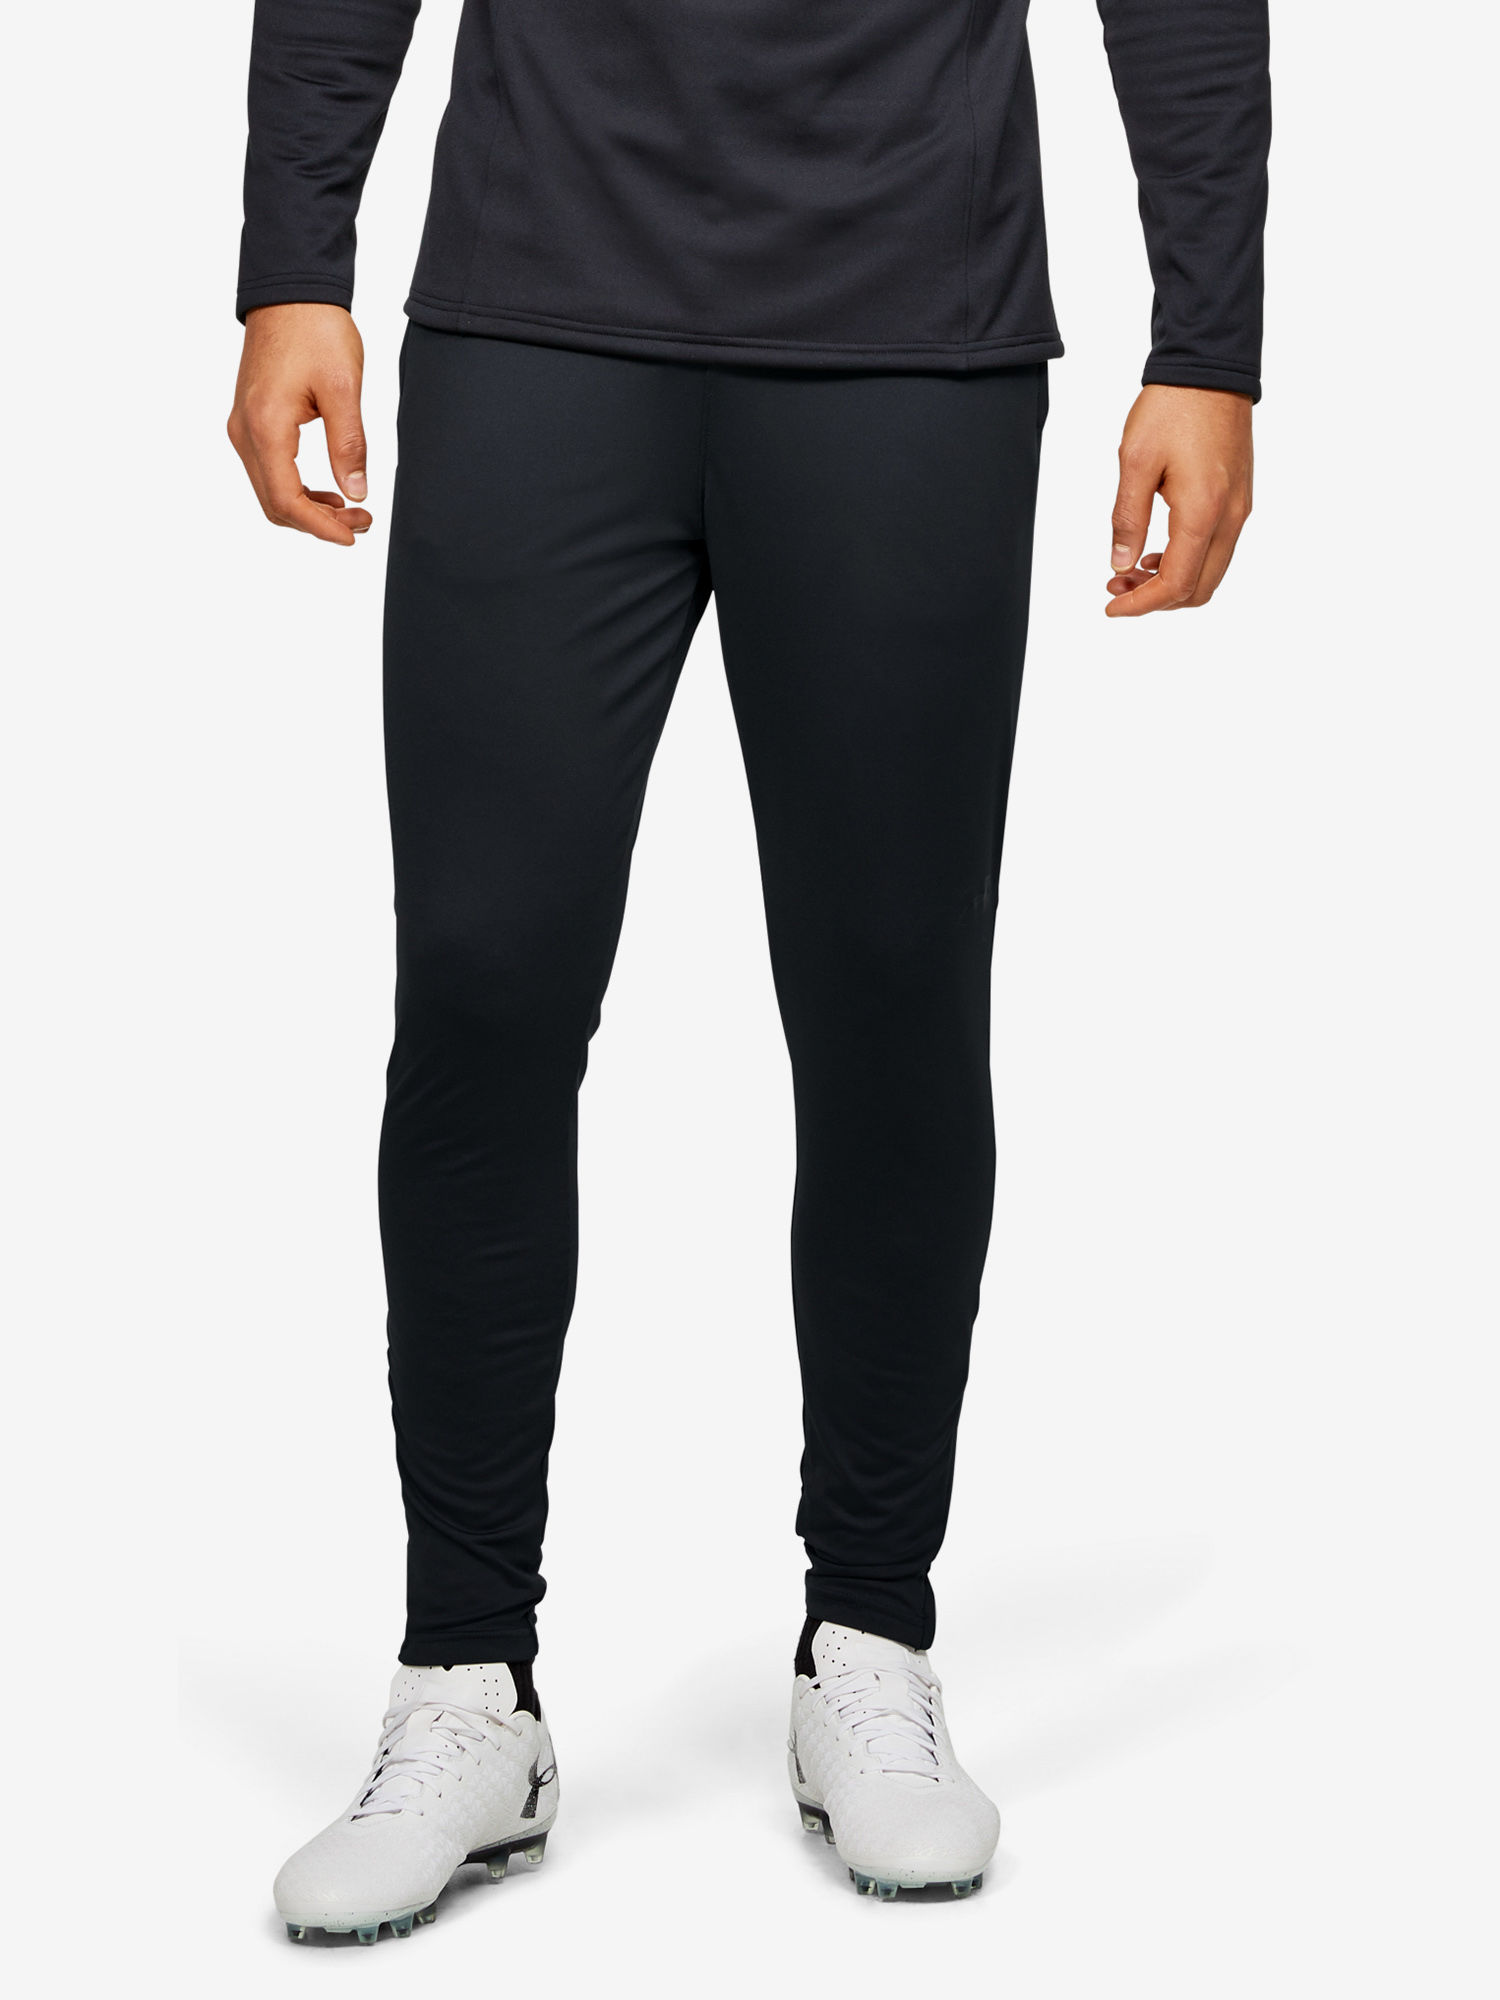 Nohavice Under Armour Challenger II Training Pant-GRY (1)